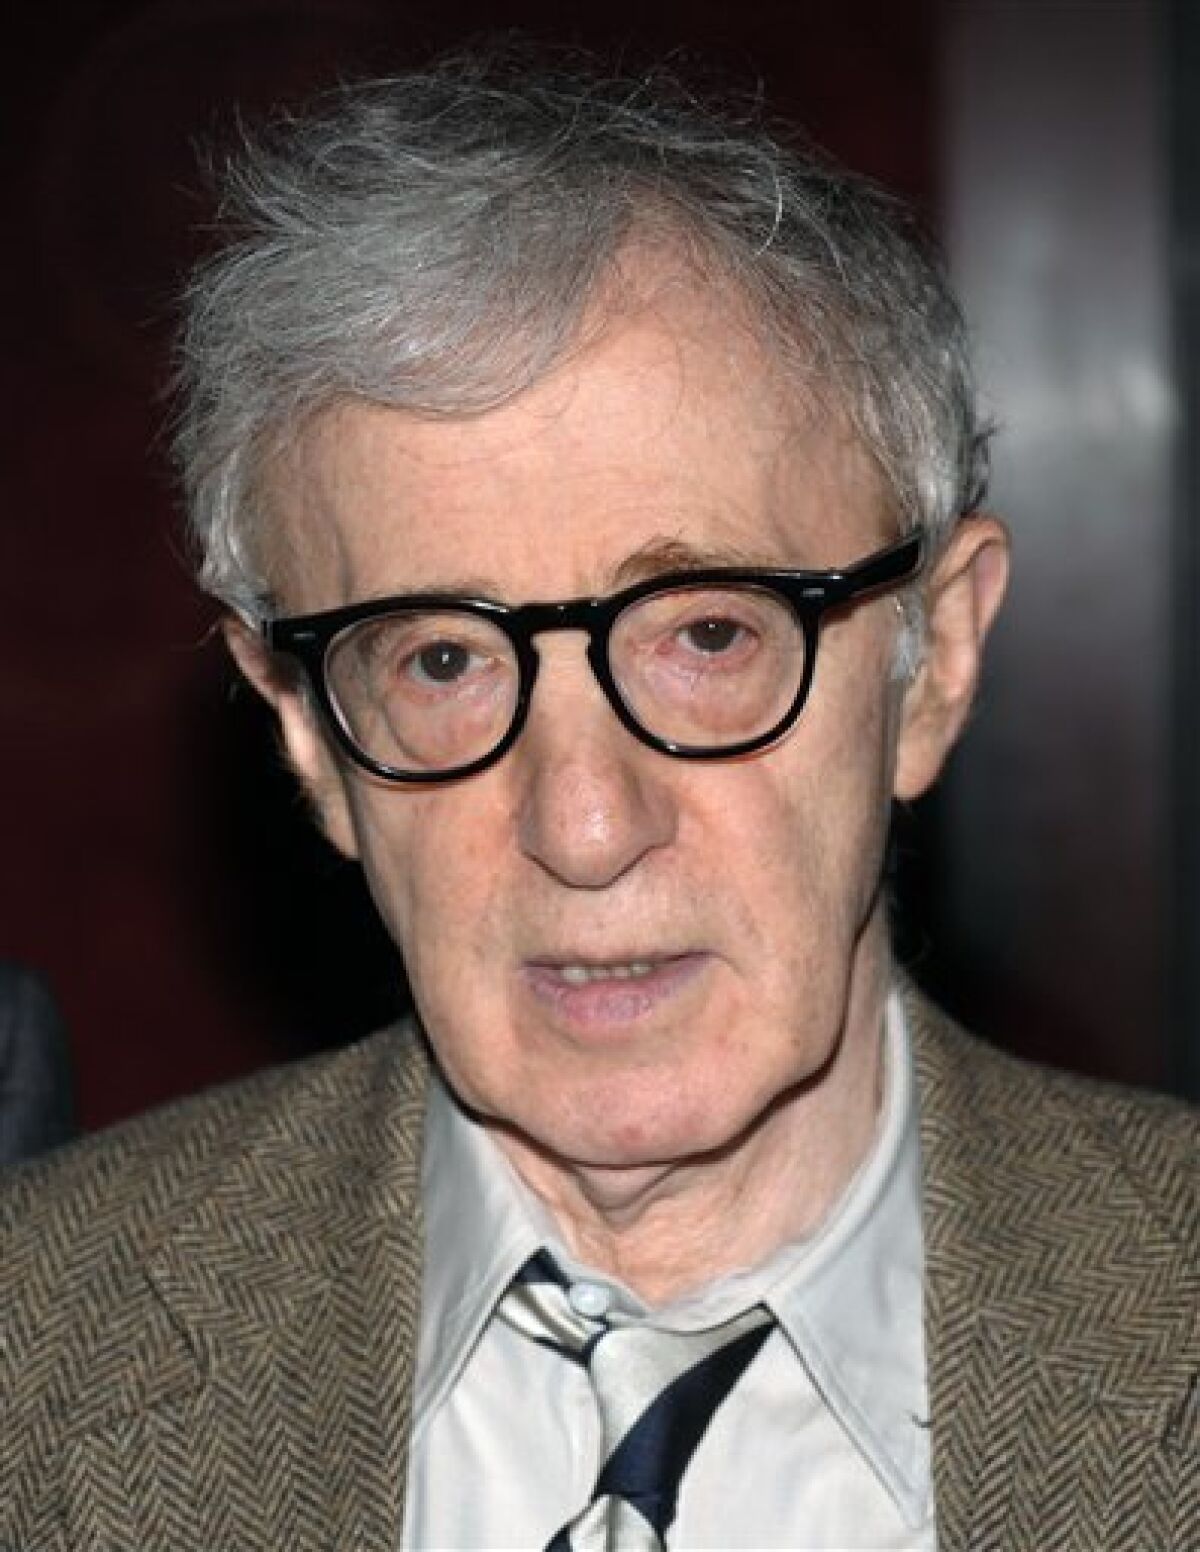 FILE - In this April 22, 2009 file photo, director Woody Allen attends the 2009 Tribeca Film Festival opening premiere of 'Whatever Works' at the Ziegfeld Theater in New York. (AP Photo/Evan Agostini, File)